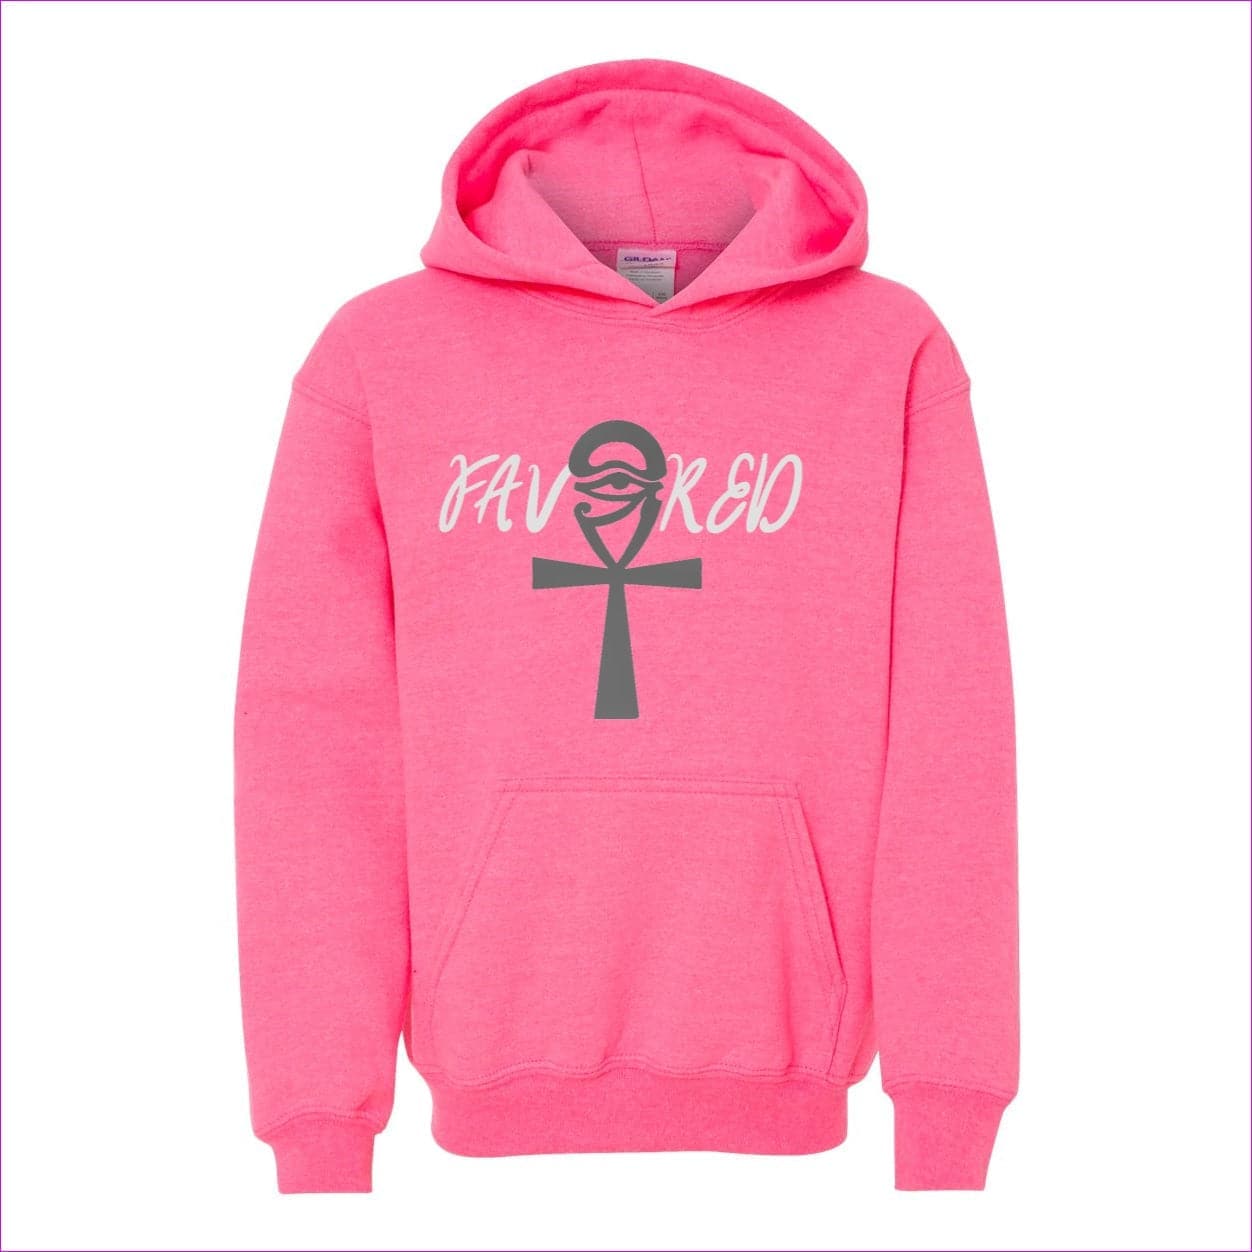 Safety Pink Favored Heavy Blend Youth Hooded Sweatshirt - kids hoodie at TFC&H Co.